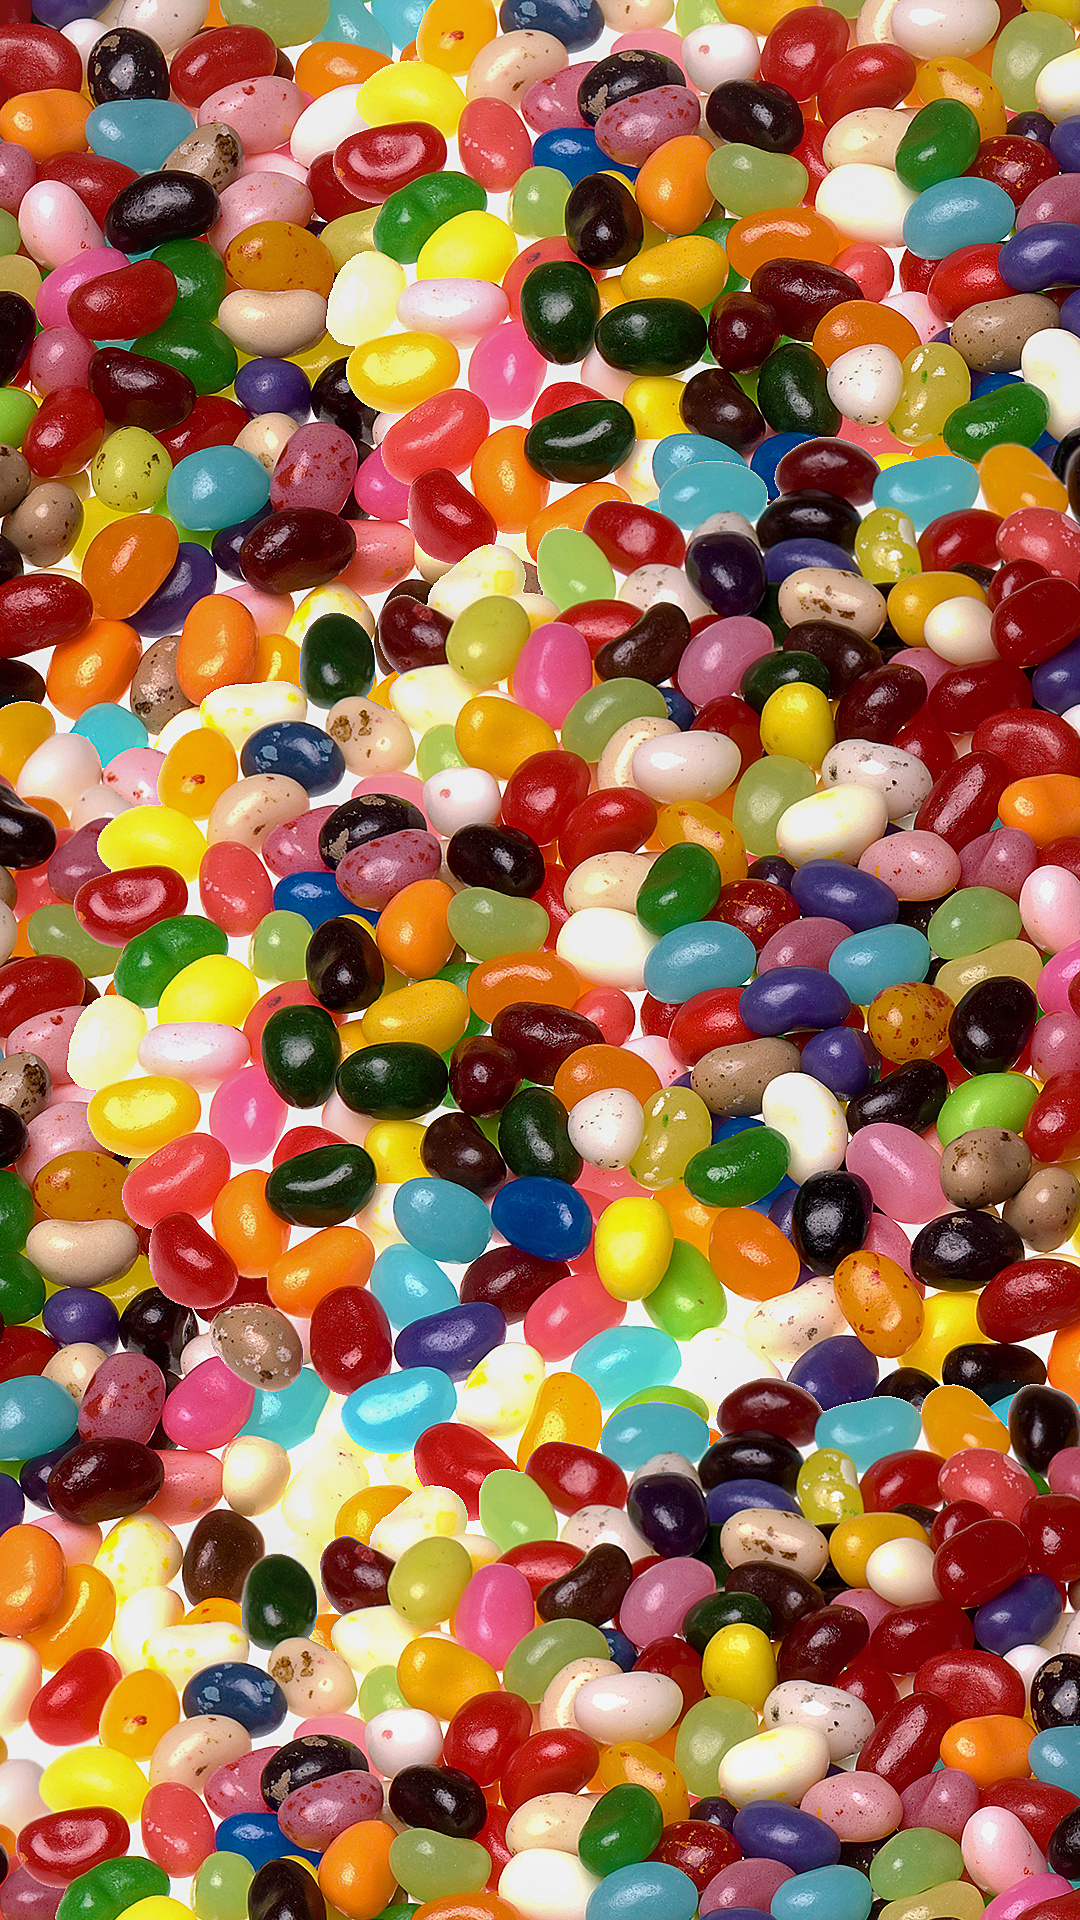 Colorful candy assortment, Sweet treats, Tasty confections, Jelly bean flavors, 1080x1920 Full HD Phone